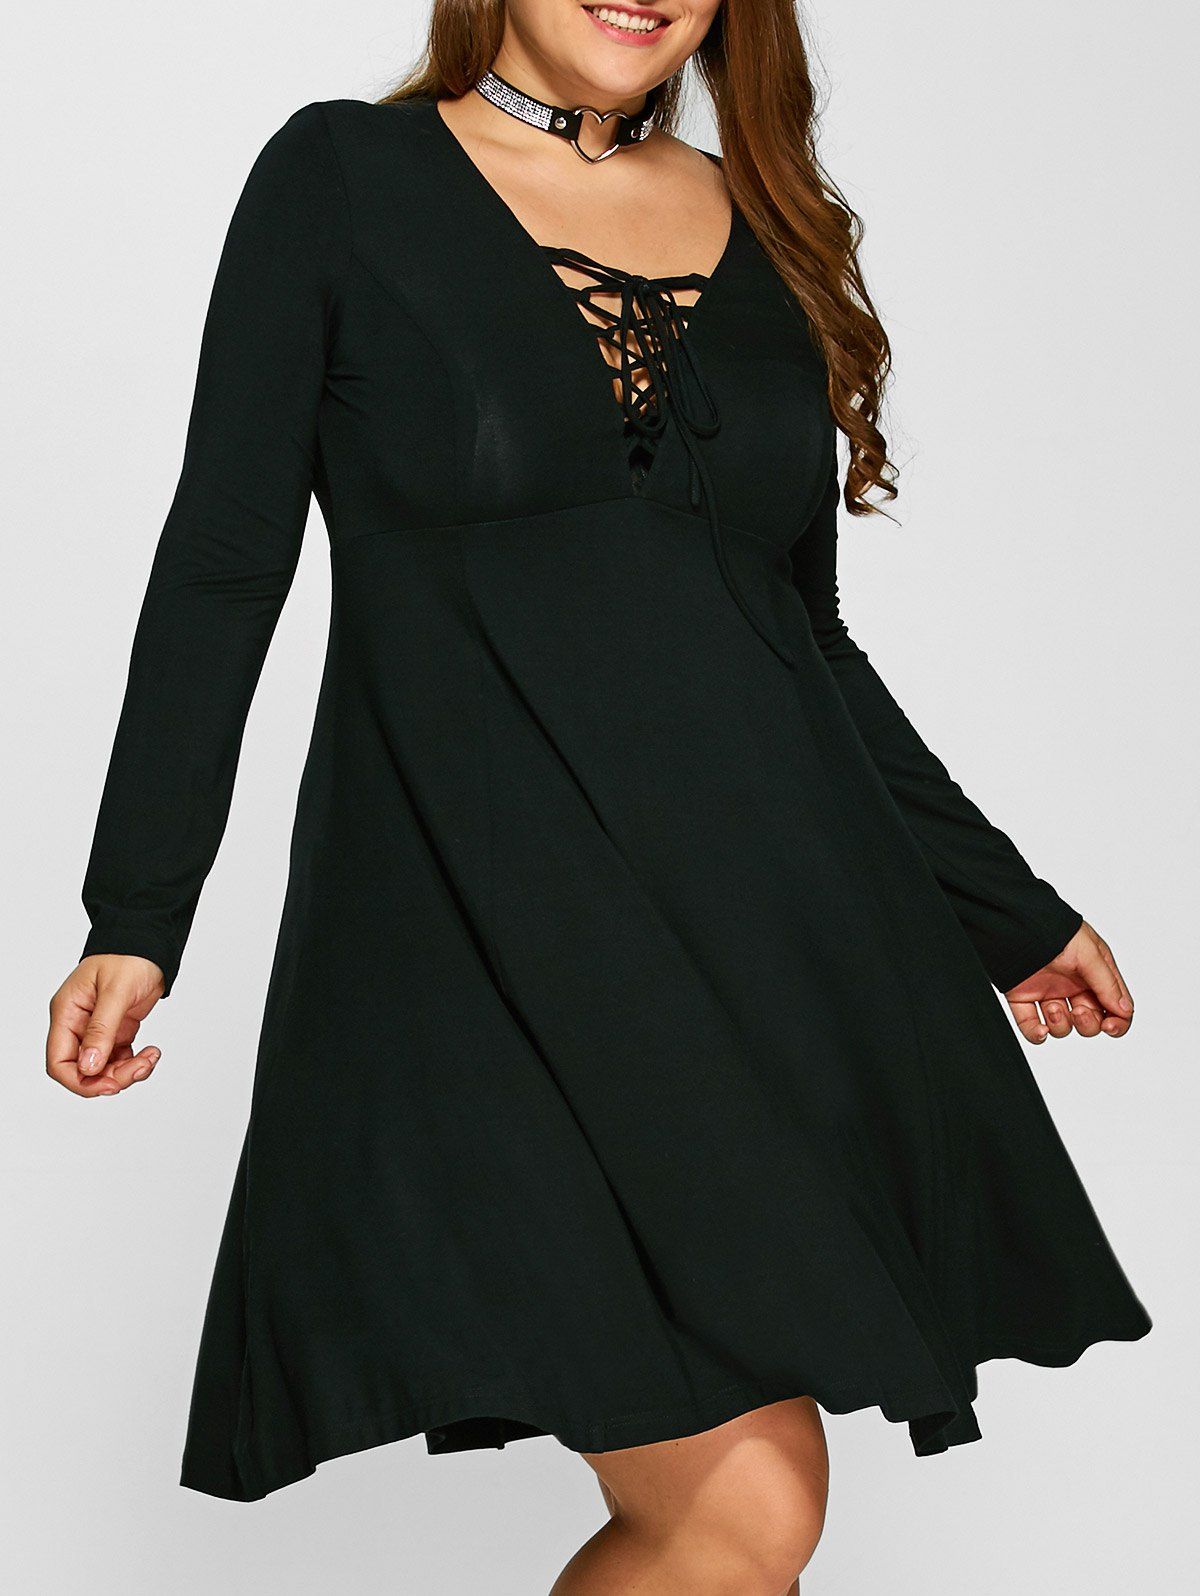 [41% OFF] 2021 Plus Size Lace-Up Bodice Empire Waist Dress In BLACK ...